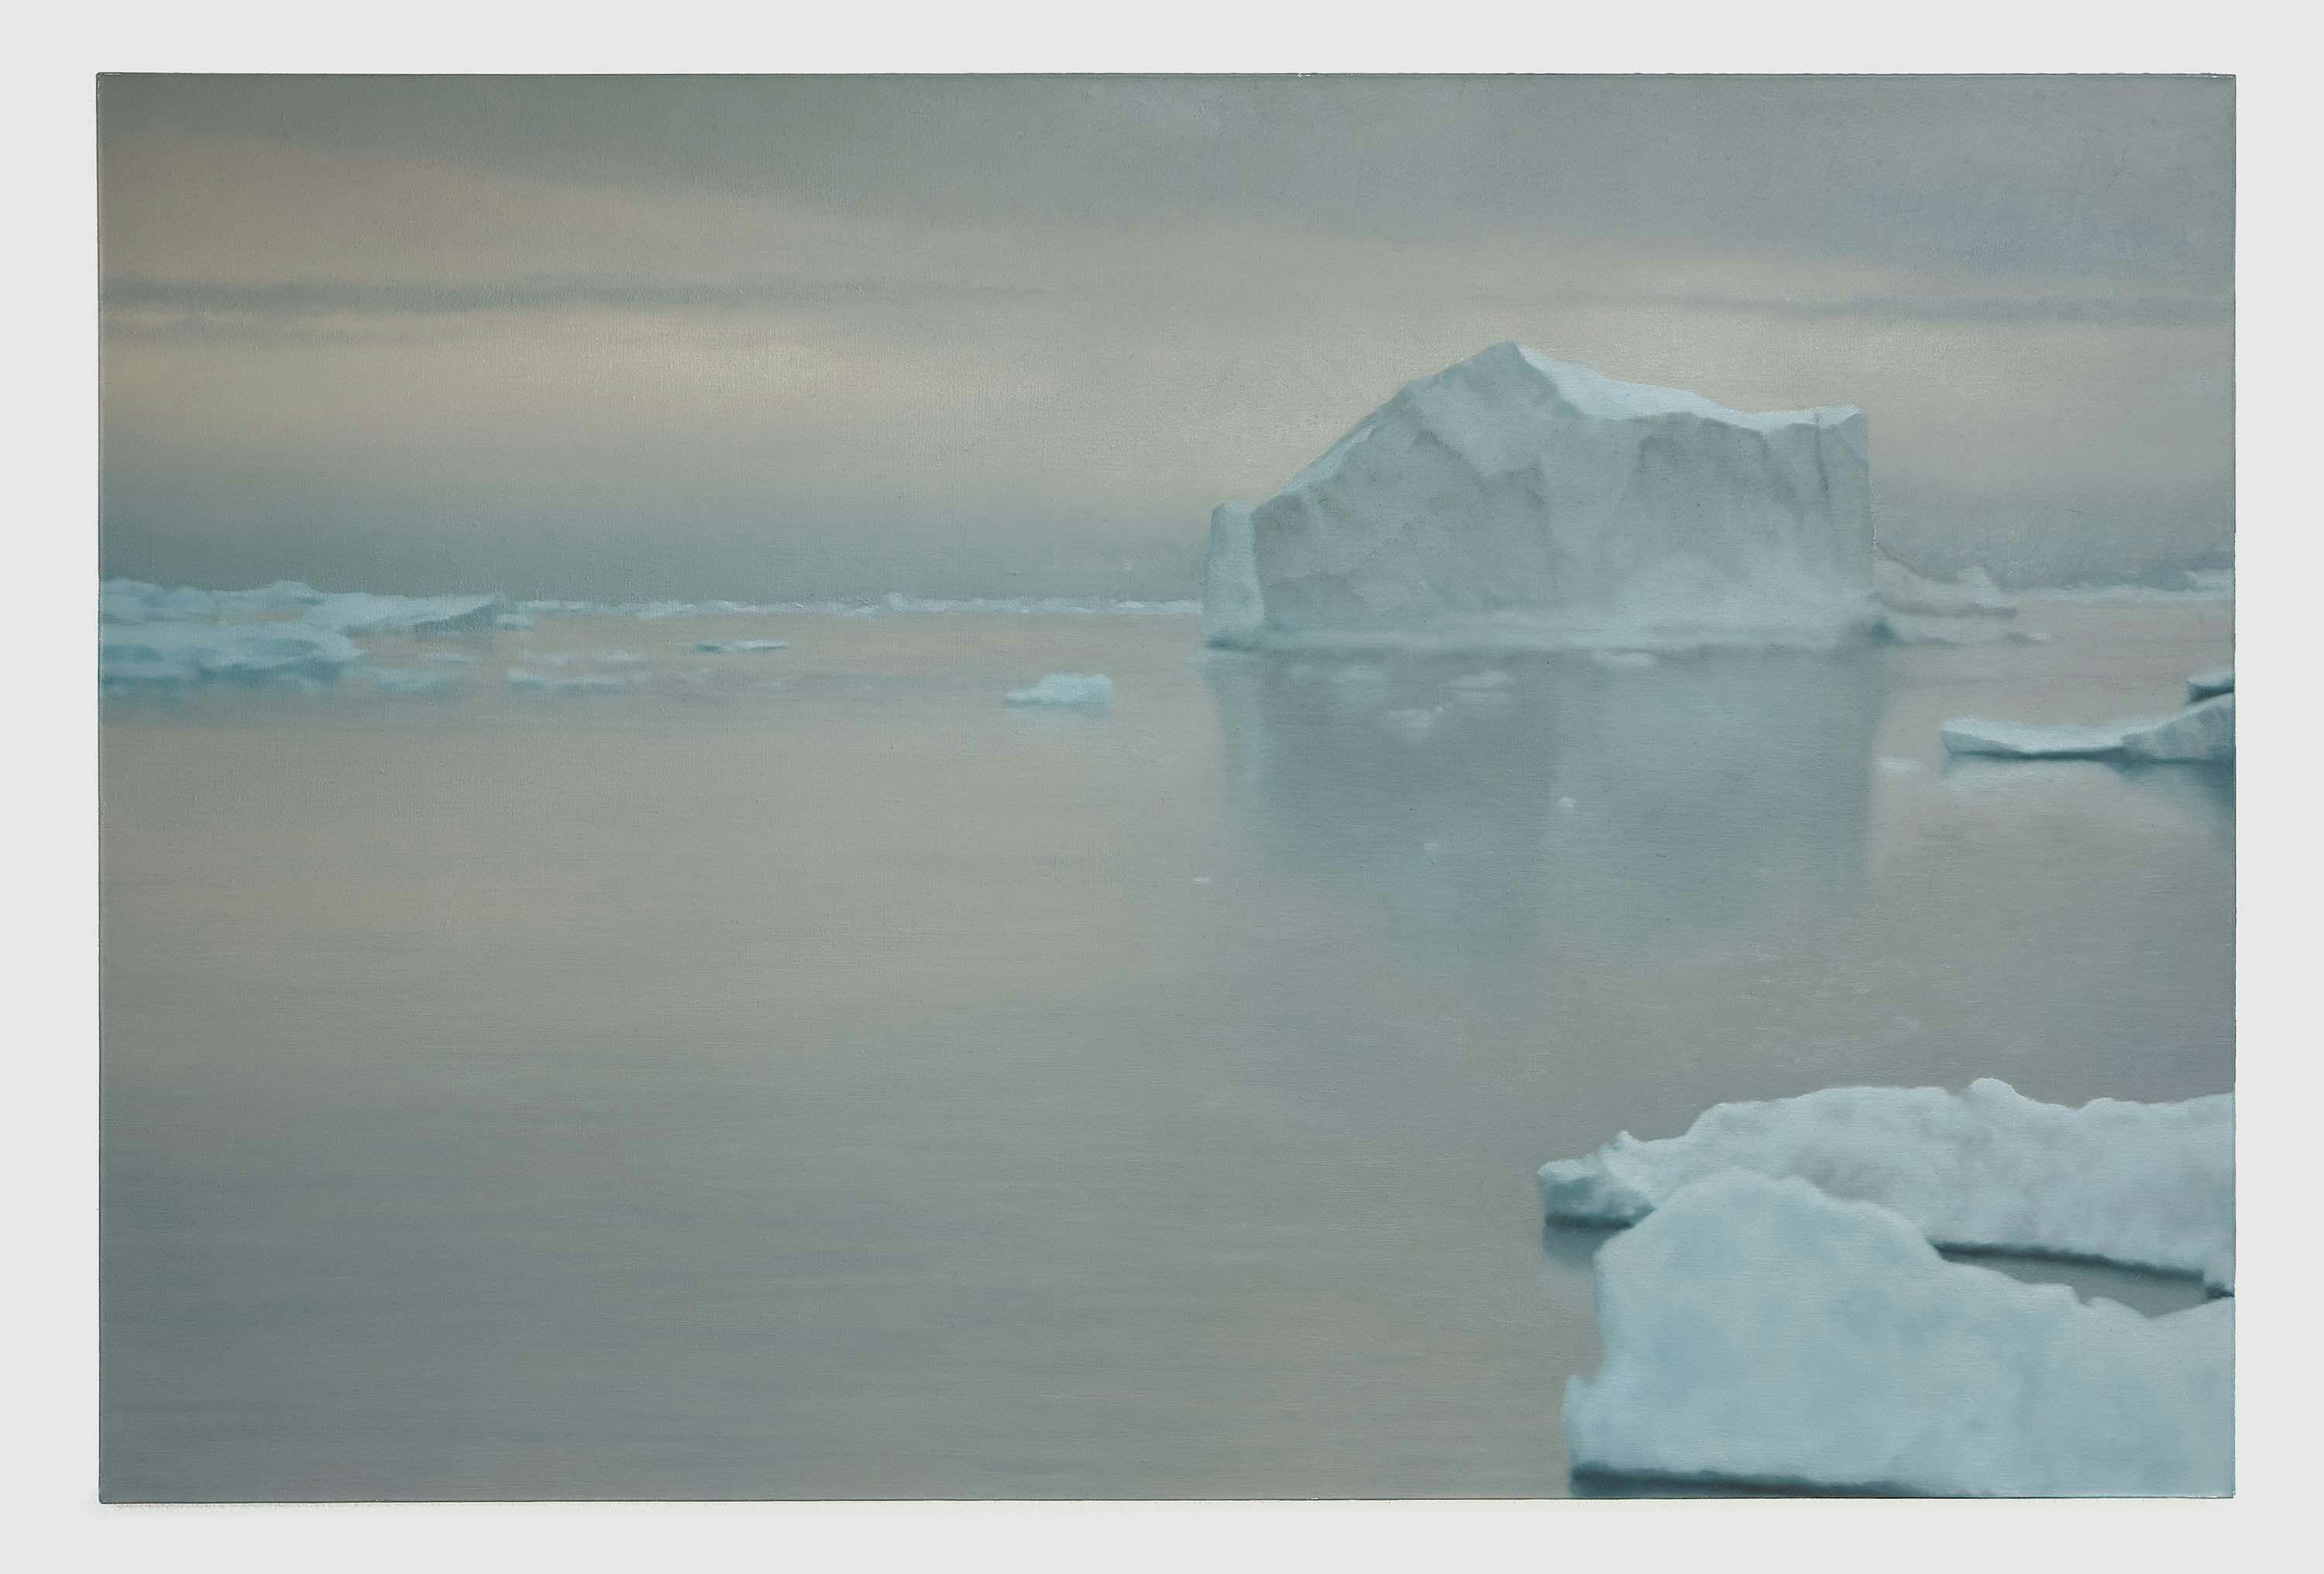 A painting by Gerhard Richter, titled Eisberg (Iceberg), dated 1982.